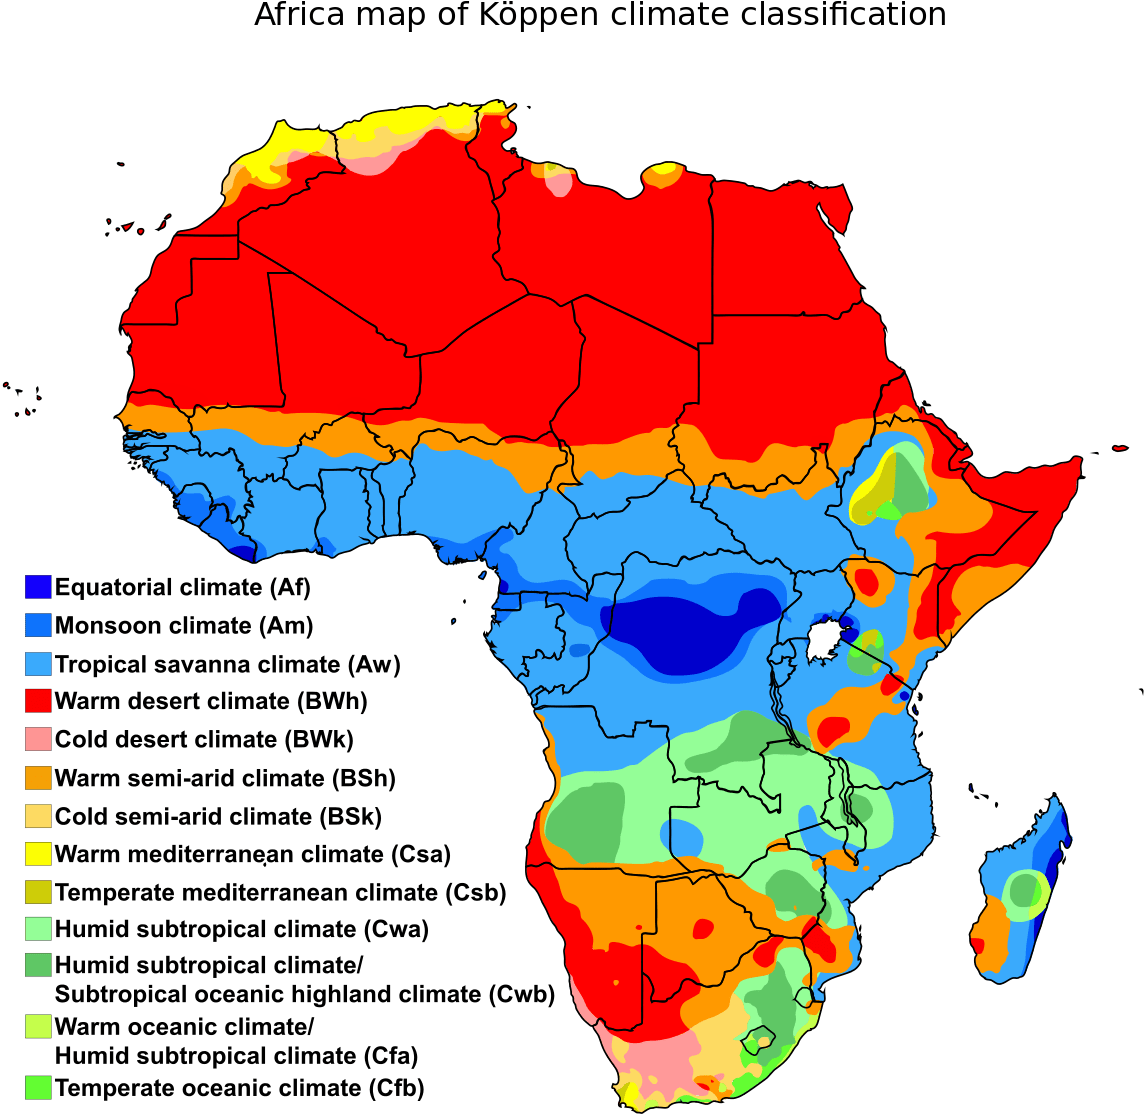 Koppen Climate Classification Map Africa